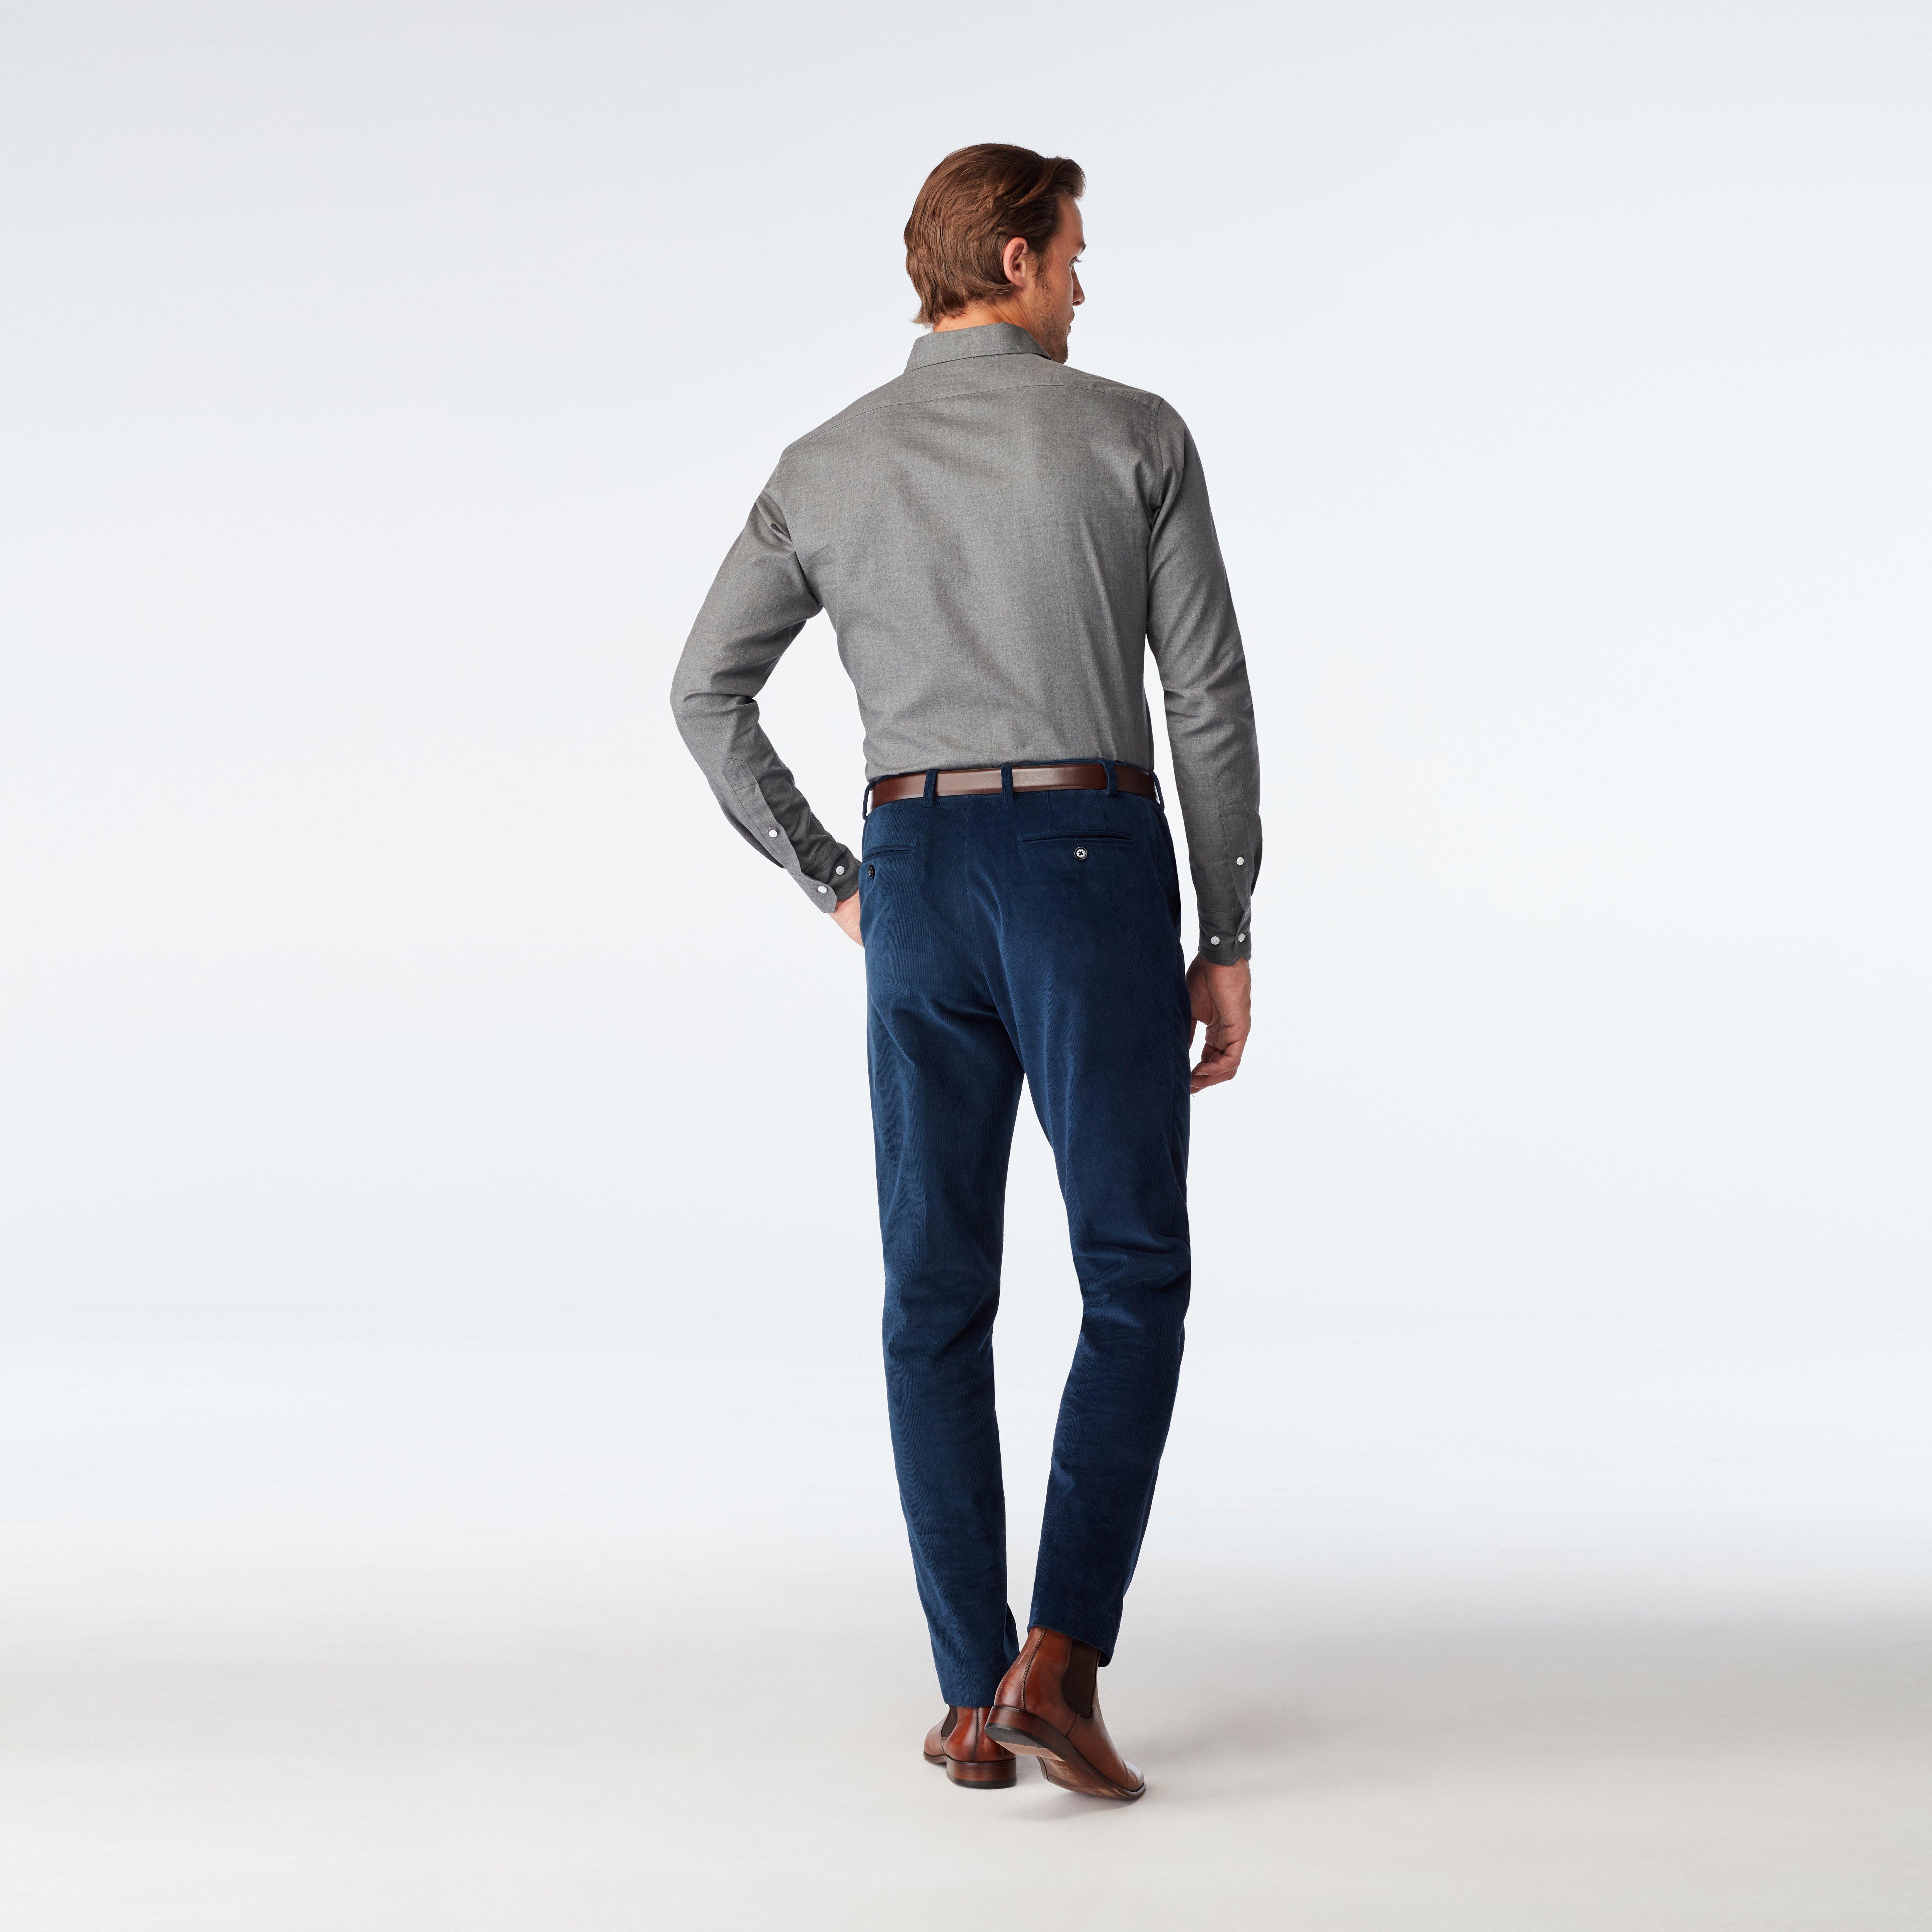 Custom Pants Made For You - Flaxton Corduroy Navy Casual Pants | INDOCHINO